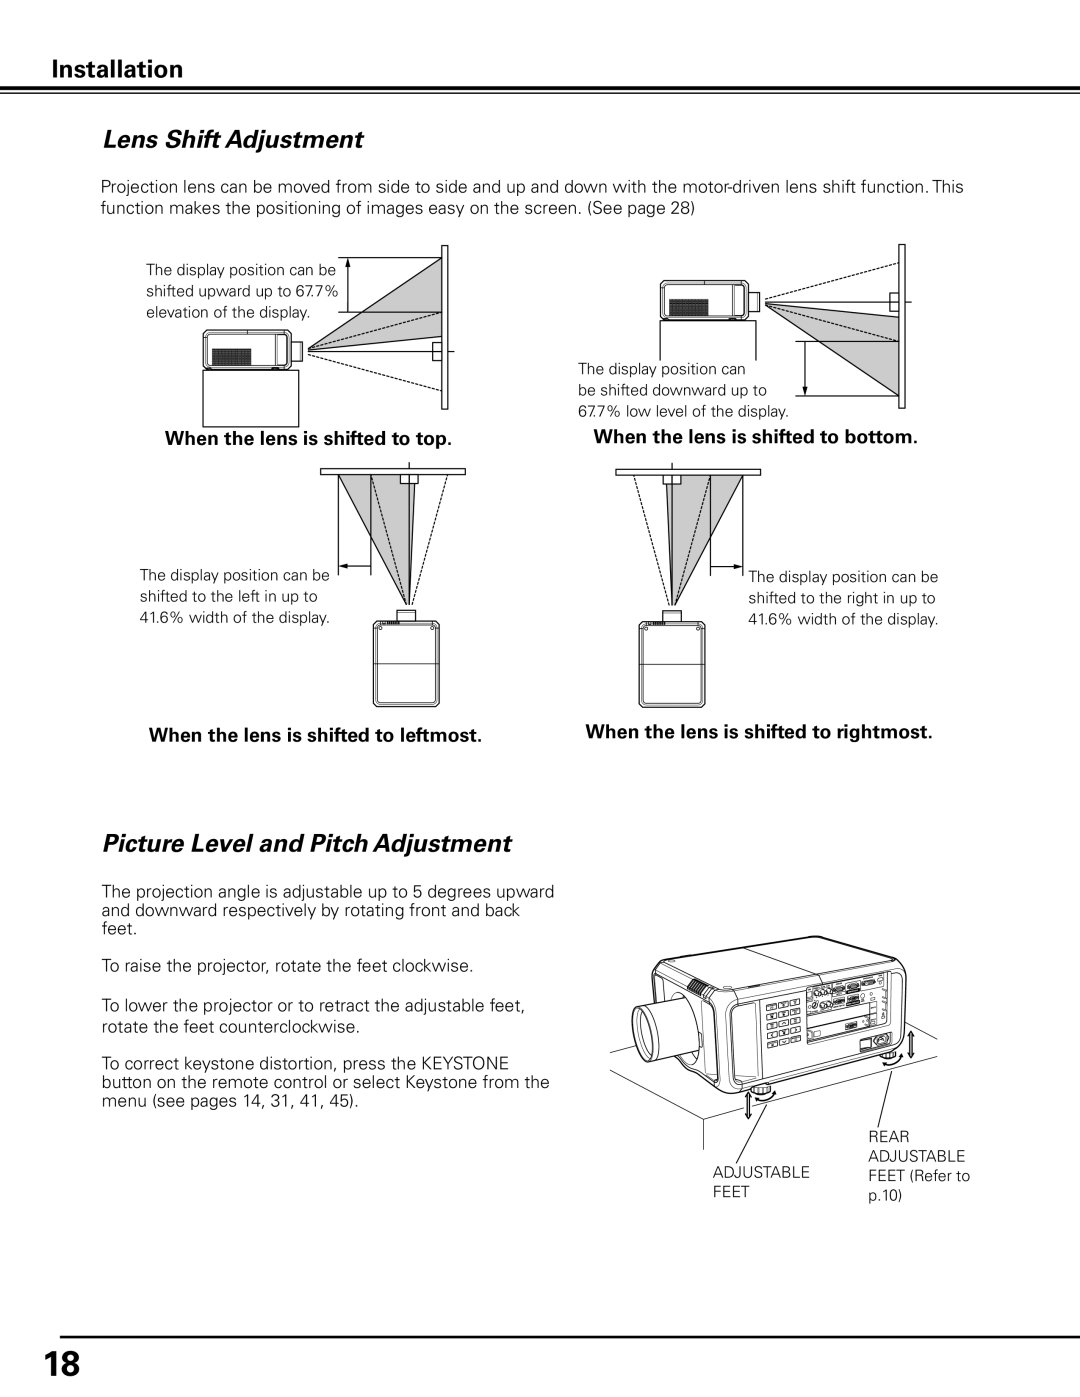 Sanyo PDG-DHT100L owner manual Lens Shift Adjustment, Picture Level and Pitch Adjustment, When the lens is shifted to top 